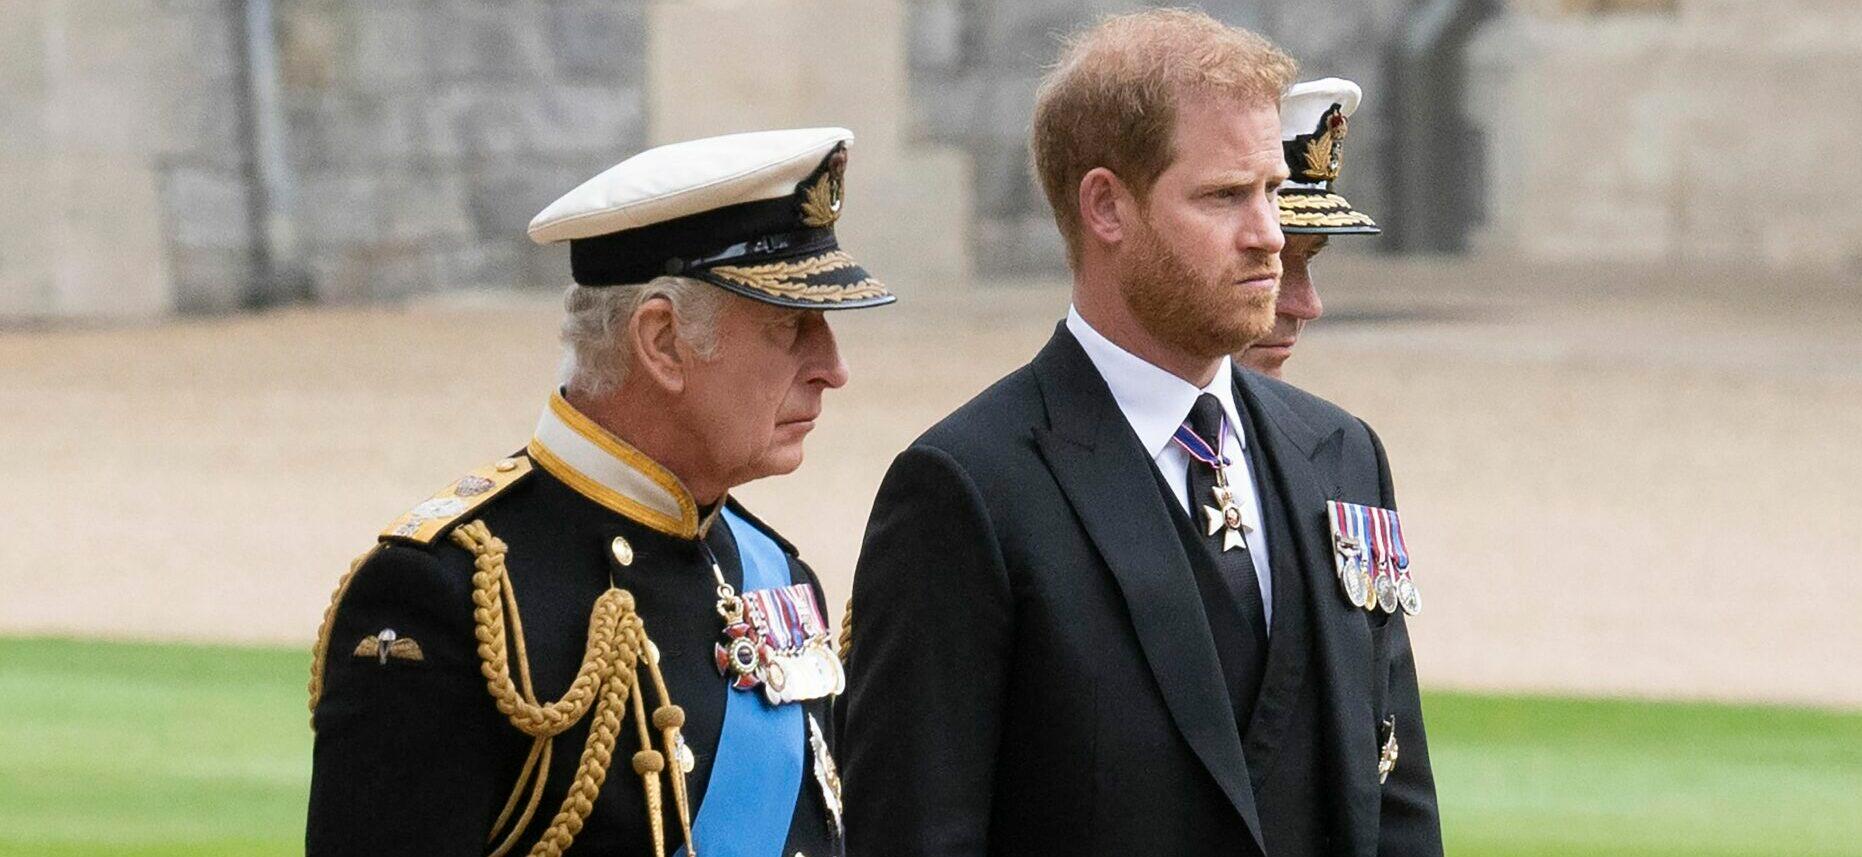 Prince Harry Excluded From King Charles III's Coronation Service; Will Perform No Official Role If He Attends